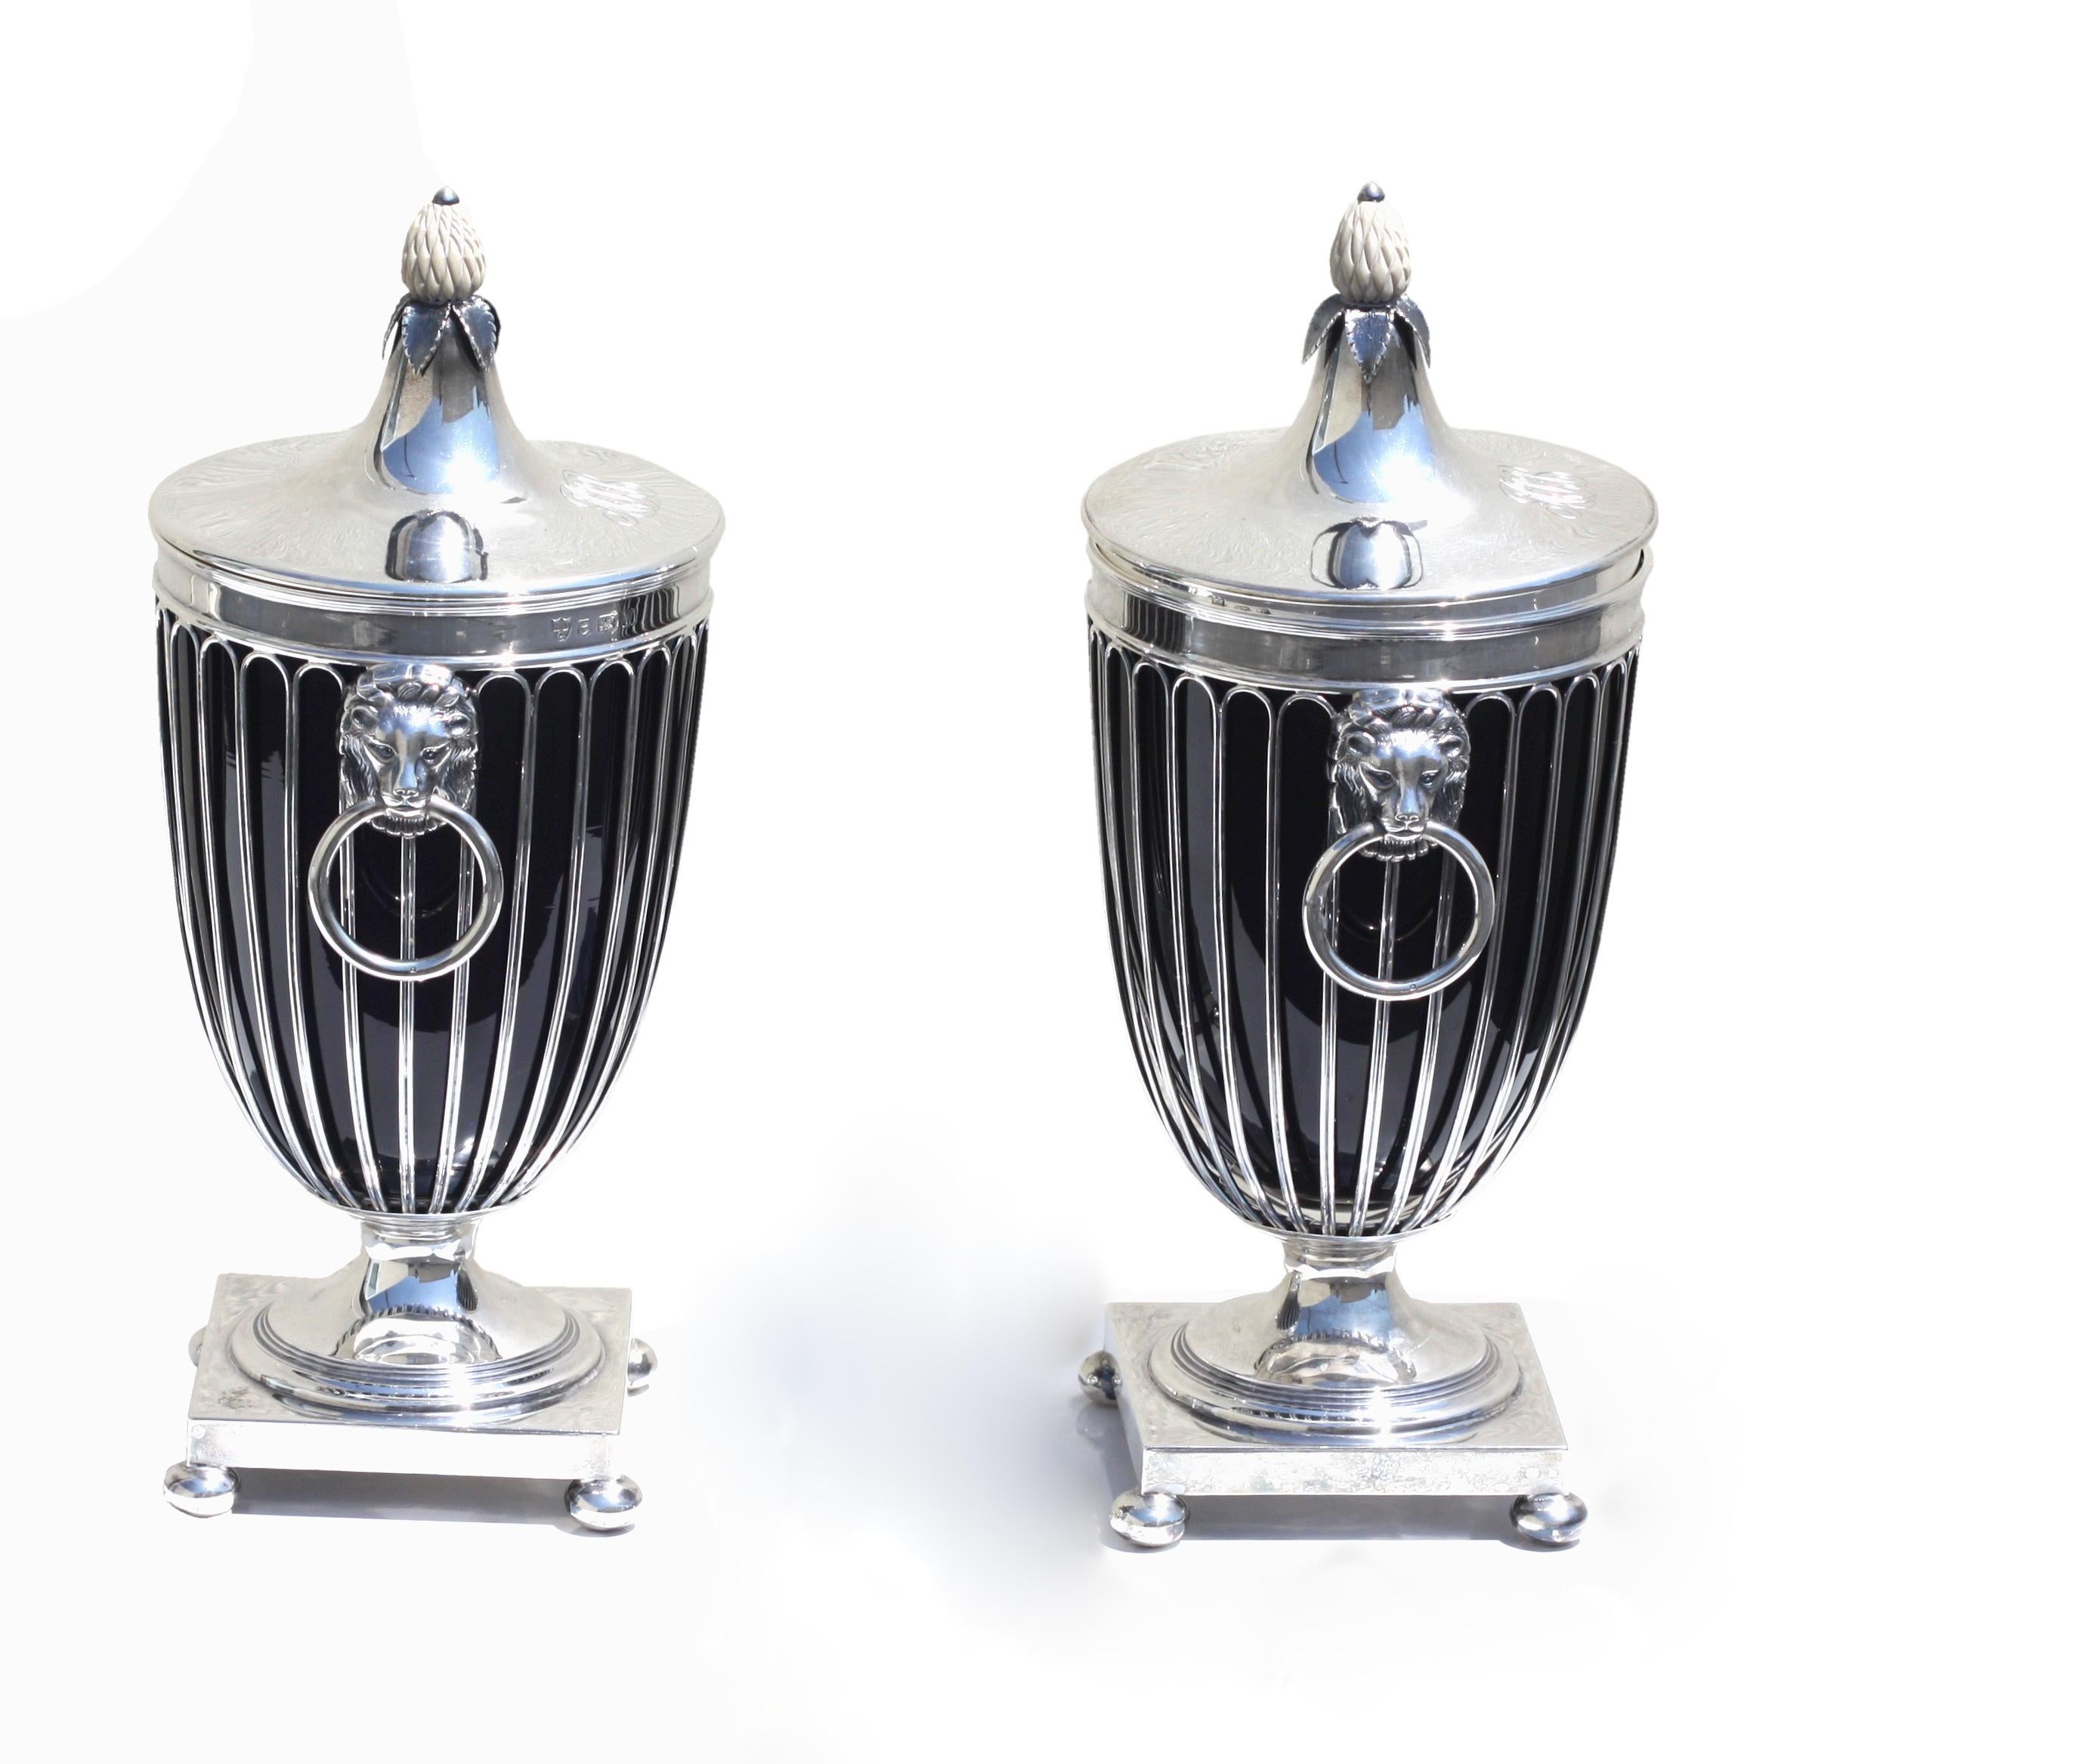 A pair of English silver vases and covers
Ellis Jacob Greenberg -Ellis & Co (Birmingham) Ltd-
in the neo-classical style; the body with fluted sides and plain rim, cast lion mask handles with ring pendants, embellished column on a spreading square